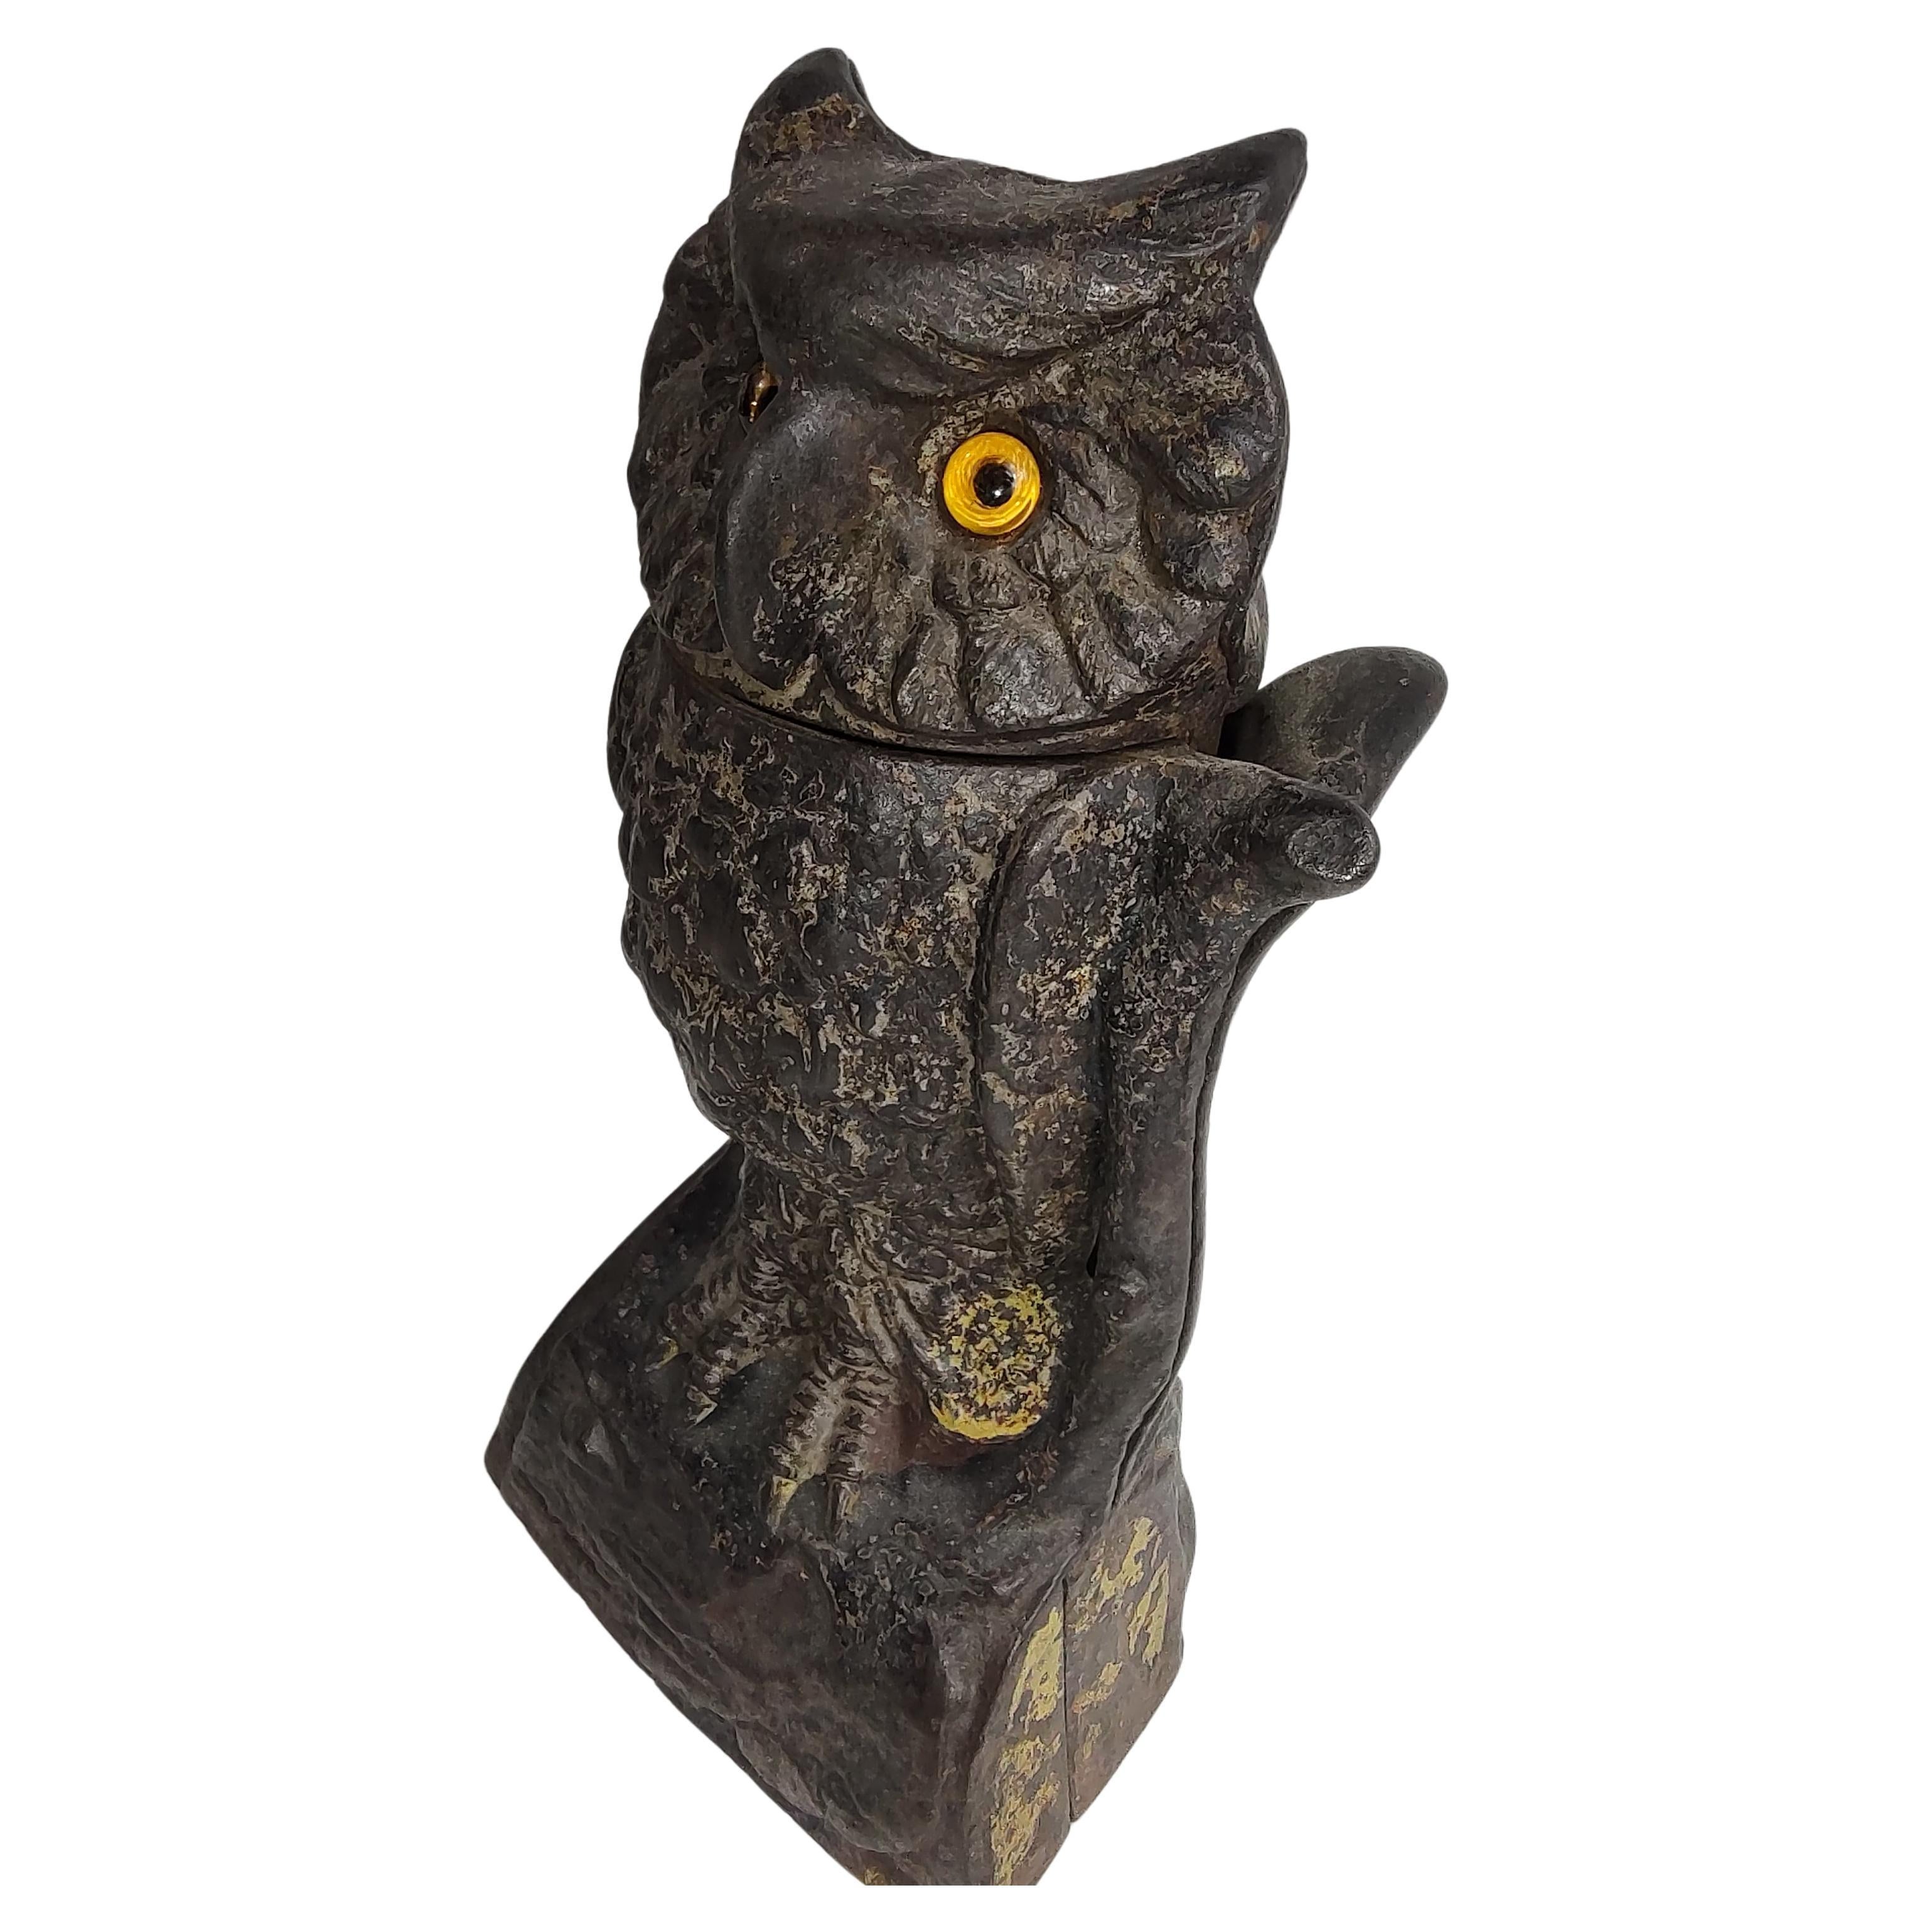 Fabulous cast iron Owl bank with a turning head coin lever and glass eyes. Lot of the original paint still intact. Missing the lock on the underside, not visible when viewing upright. In excellent antique condition.